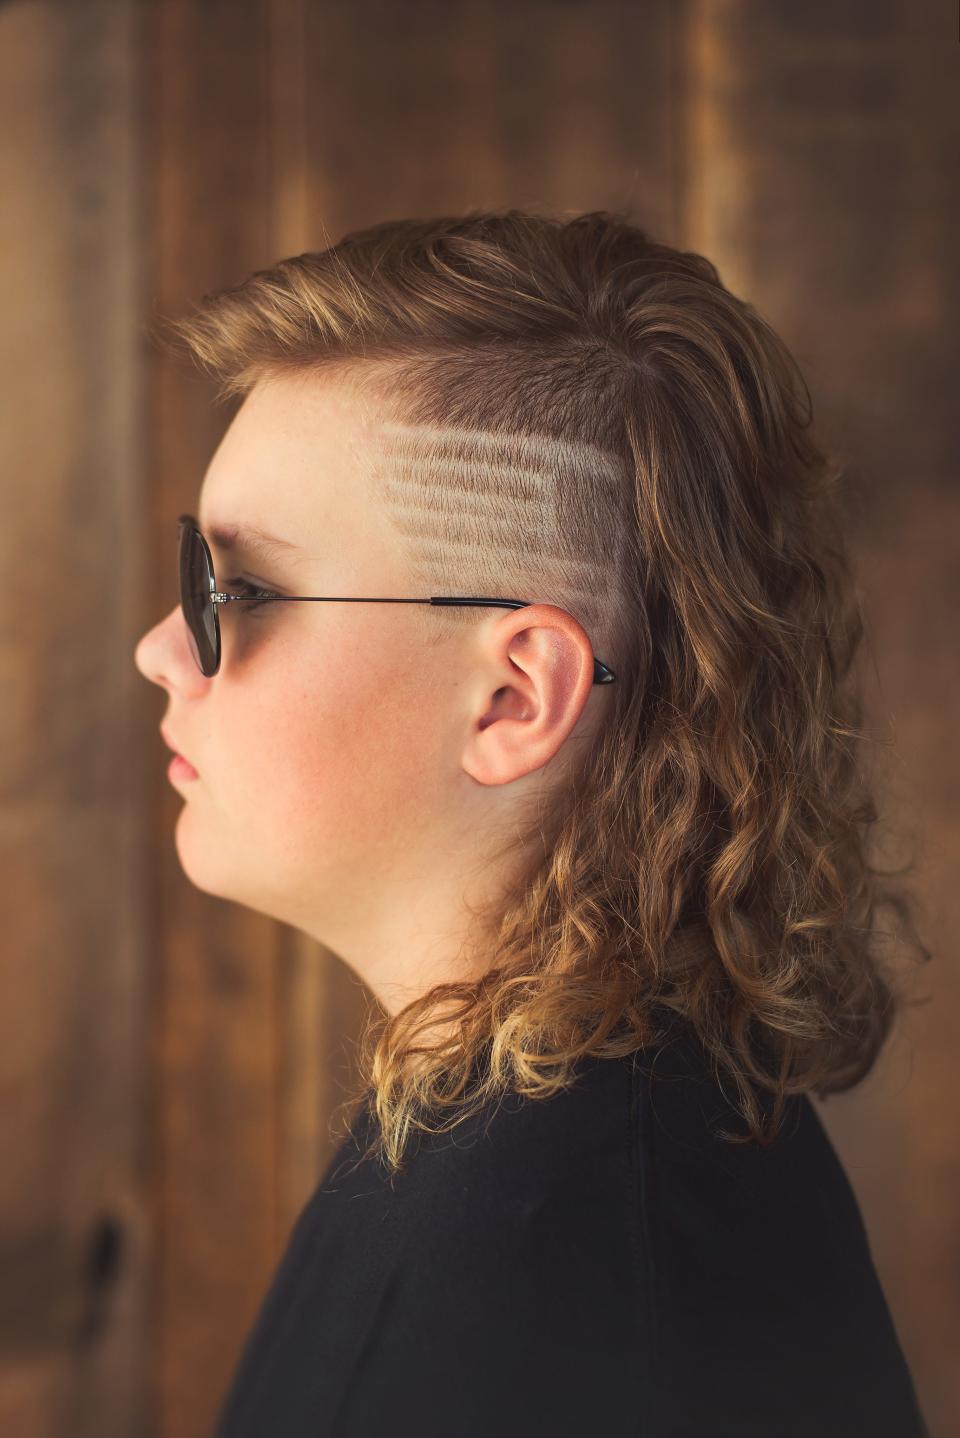 Max Weihbrecht, 13, of Lawrence, Wisconsin poses for his side profile picture to enter the USA Mullet Championships.